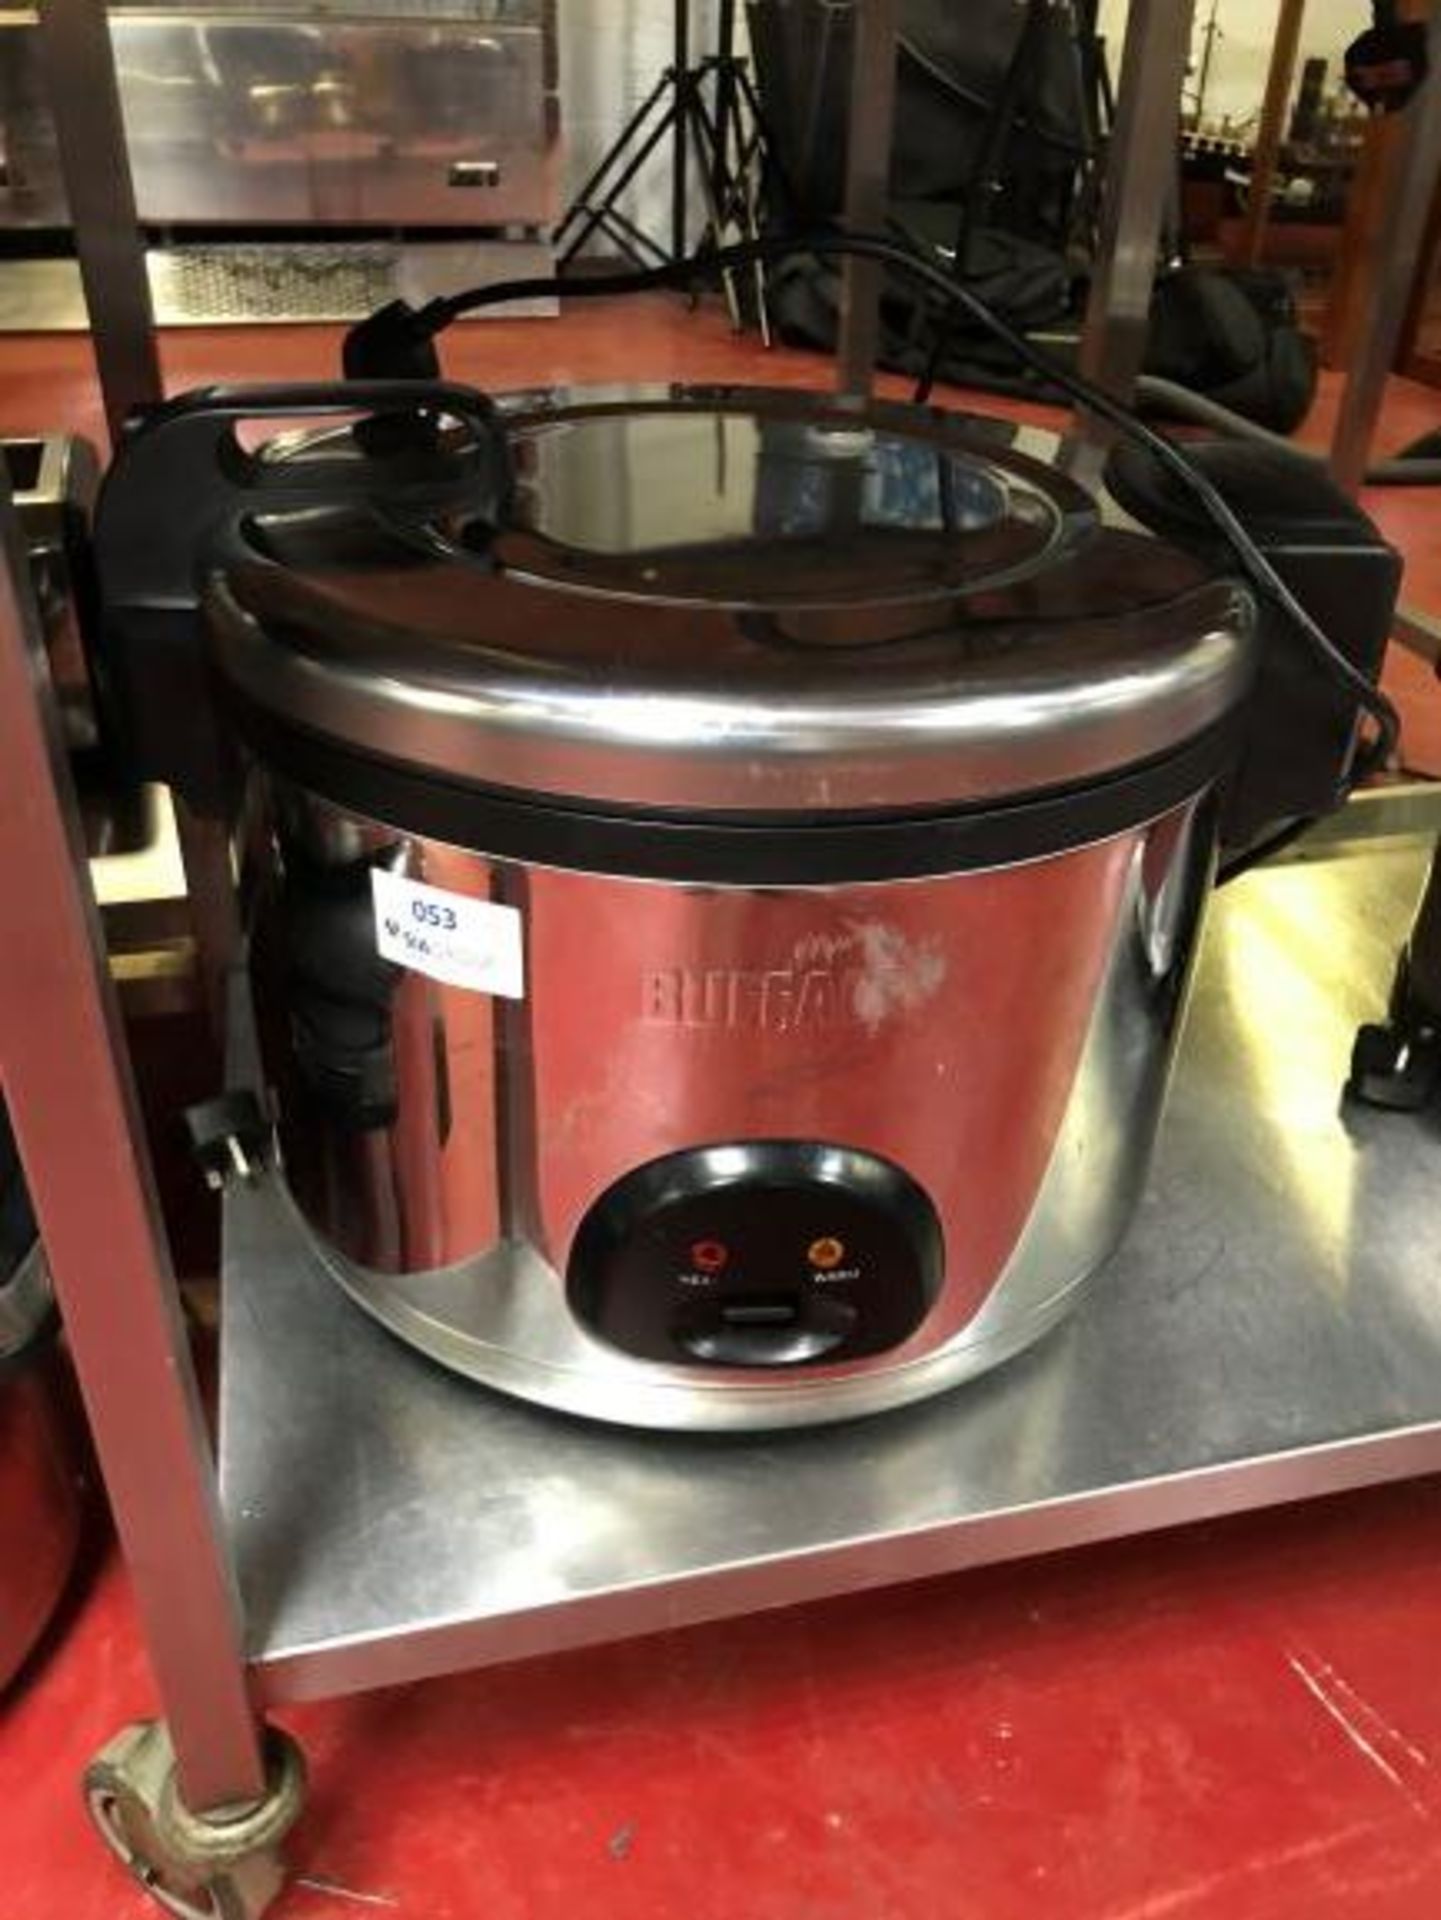 Buffalo CK698-02 9 Litre stainless steel commercial rice cooker - Image 3 of 3